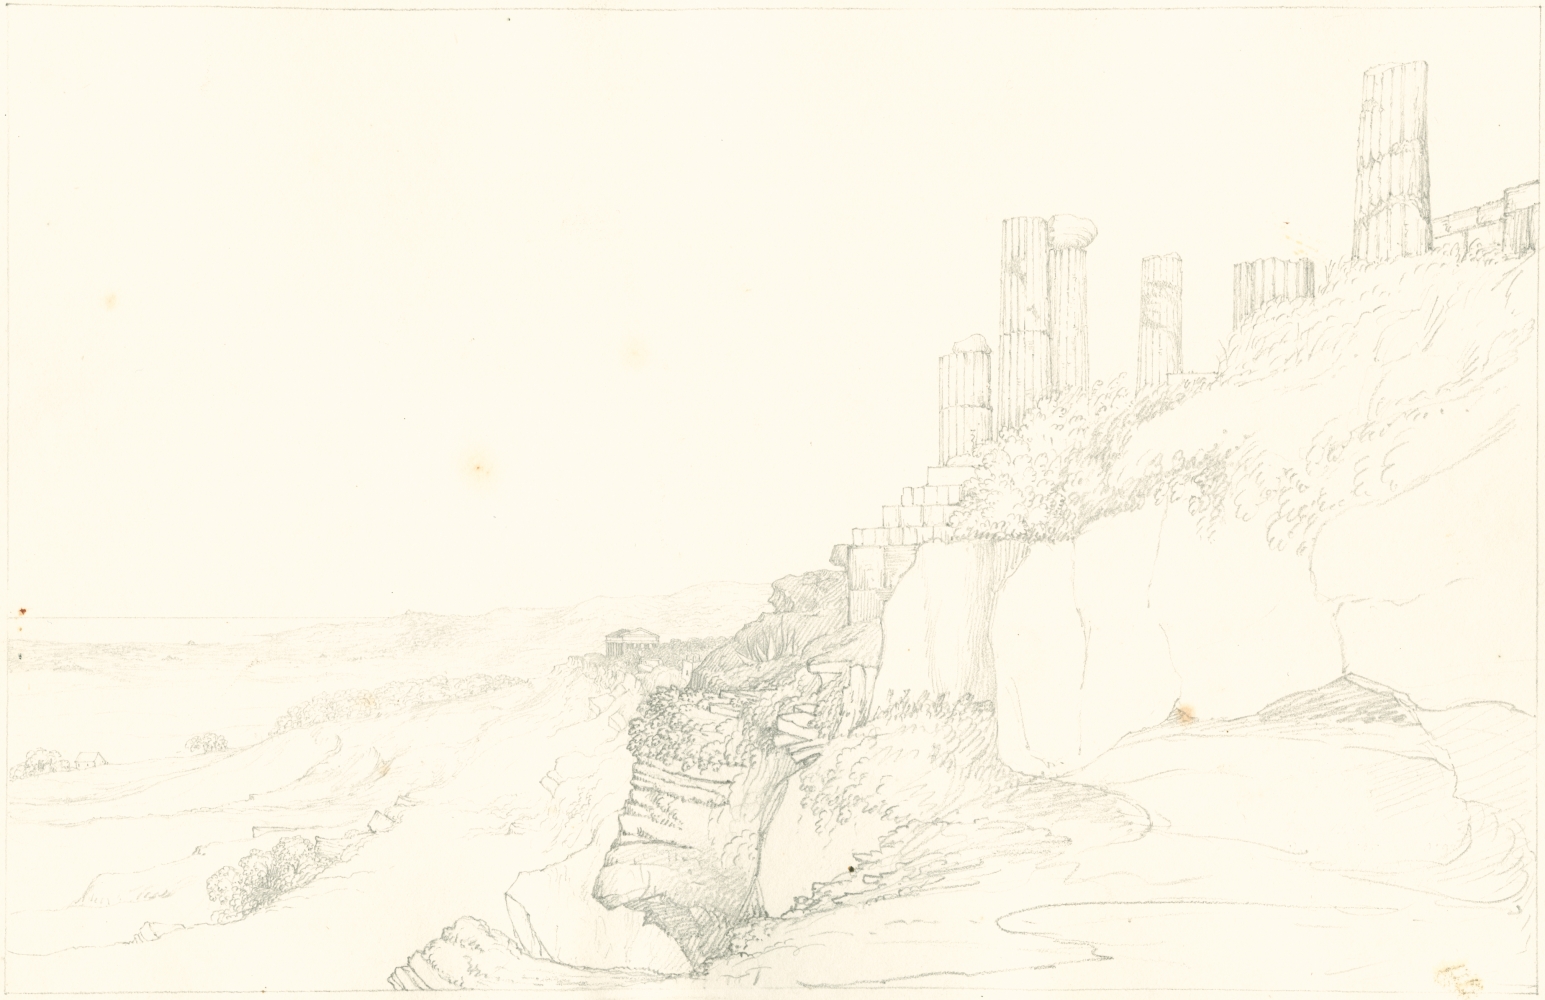 Sir John Frederick William Herschel (English, 1792-1872) "No 391 View from below the Temple of Juno, Girgenti Sicily. Temple of Concord in the distance”, 27 June 1824 Camera lucida drawing, pencil on paper 20.0 x 31.0 cm on 25.1 x 38.4 cm paper